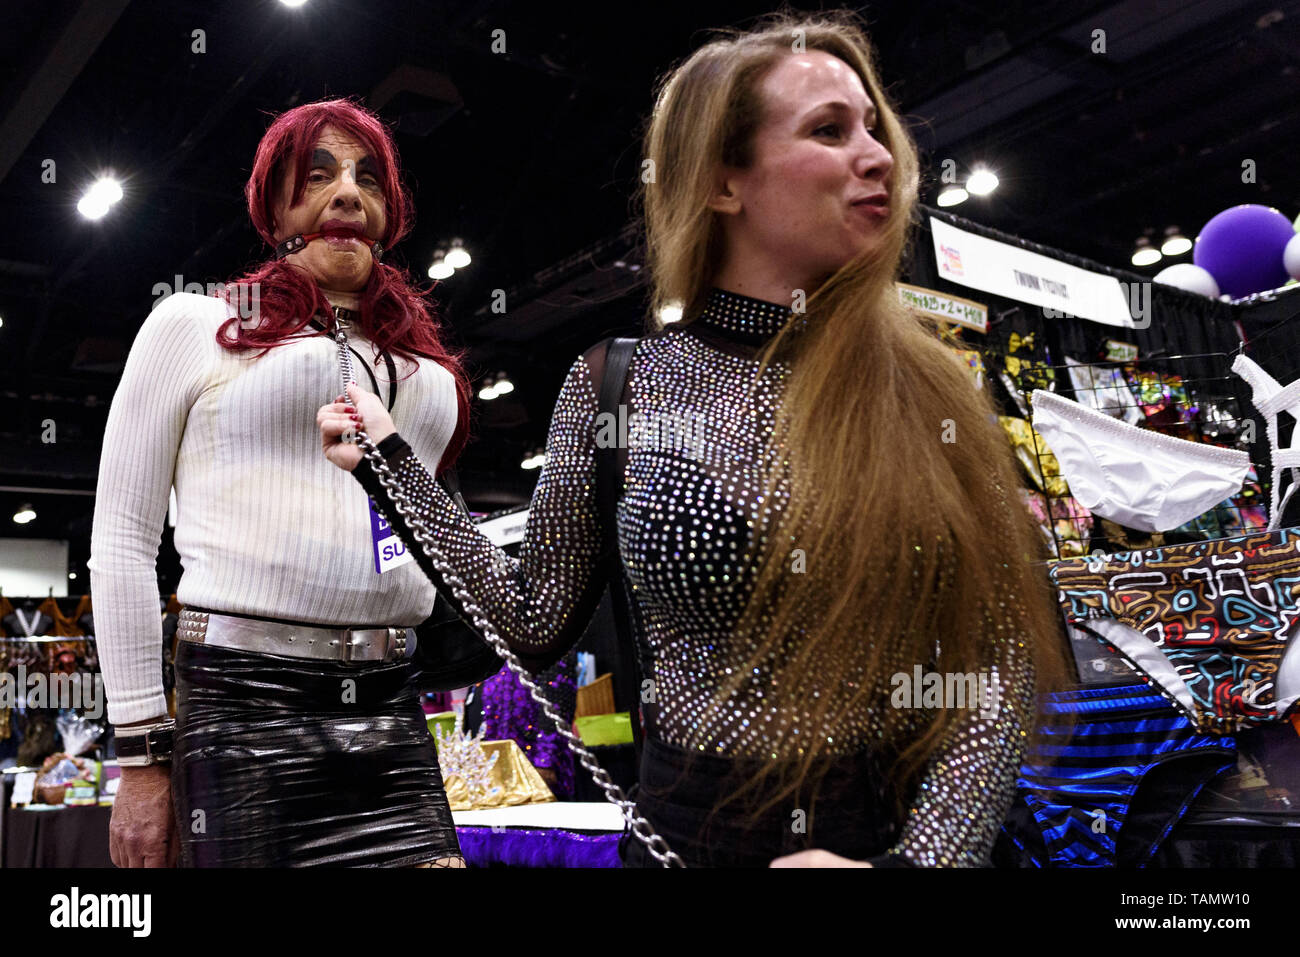 Los Angeles, California, USA. 15th Mar, 2019. A woman walks a man on a leash during RuPaul's DragCon LA 2019 in Los Angeles, California. The annual three-day RuPaul's DragCon is the world's largest drag culture convention and takes place in New York and Los Angeles. Credit: Ronen Tivony/SOPA Images/ZUMA Wire/Alamy Live News Stock Photo